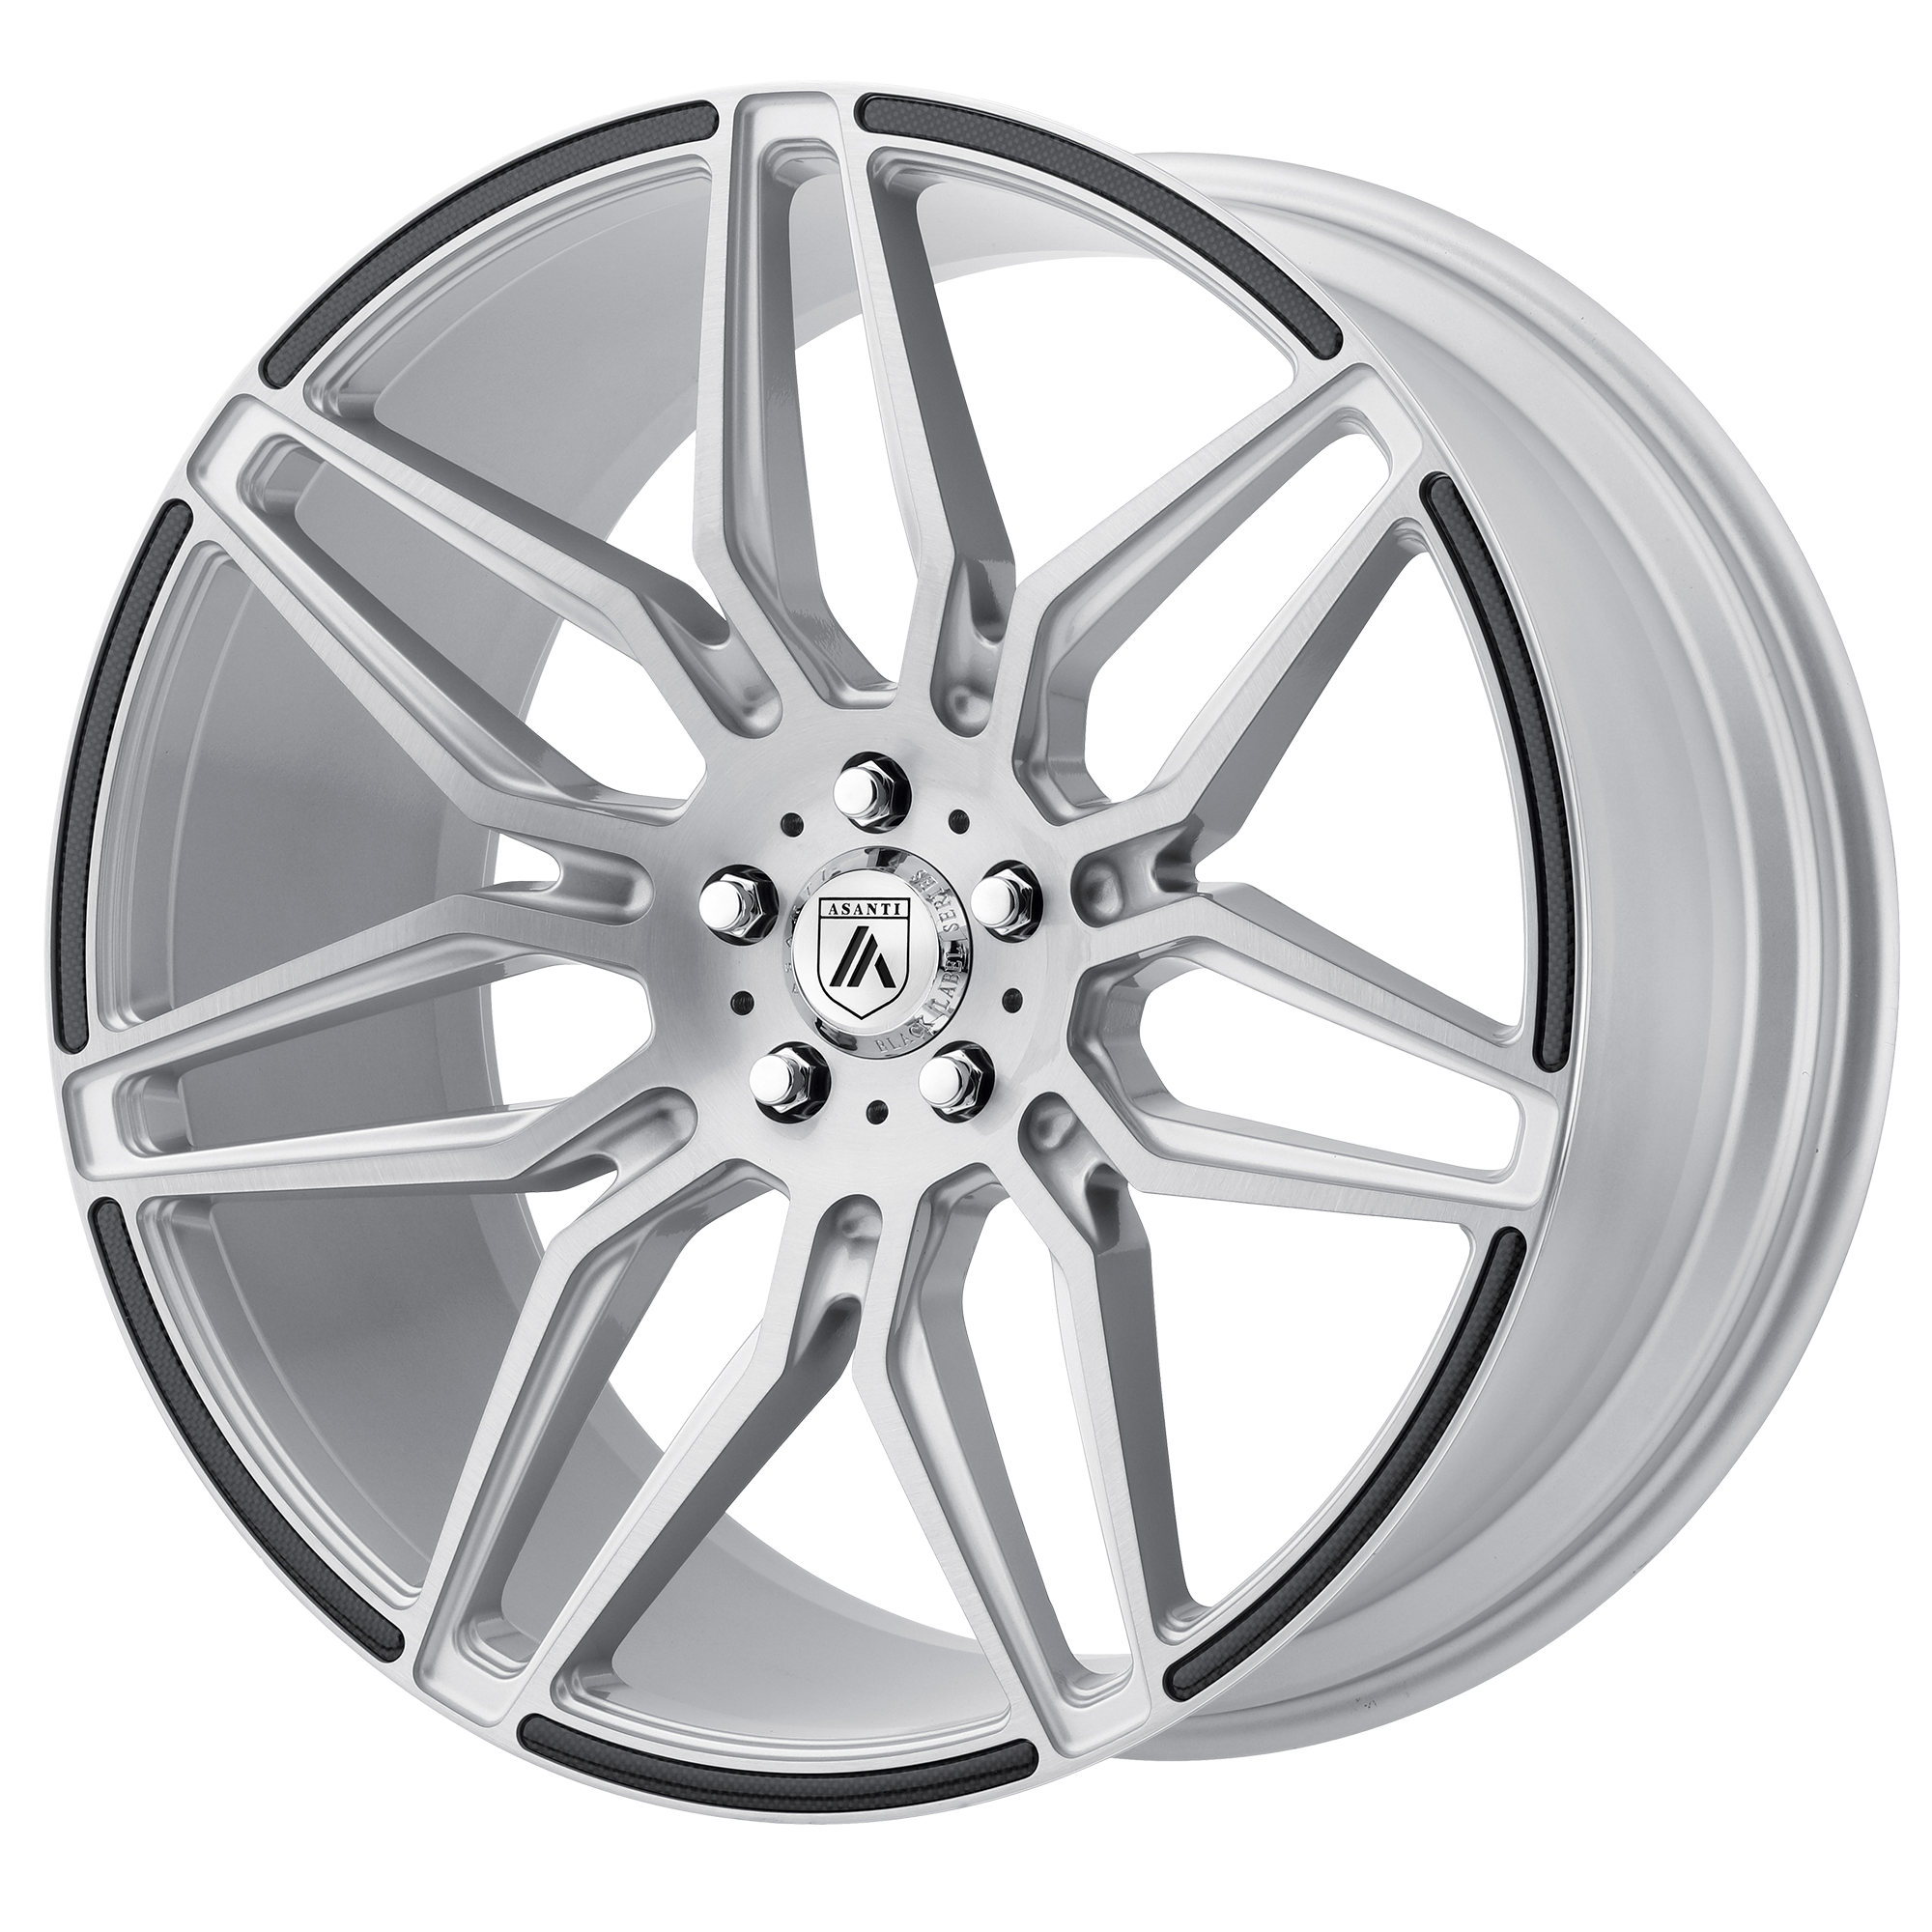 SIRIUS 20x9 5x114.30 BRUSHED SILVER W/ CARBON FIBER INSERTS (35 mm) - Tires and Engine Performance